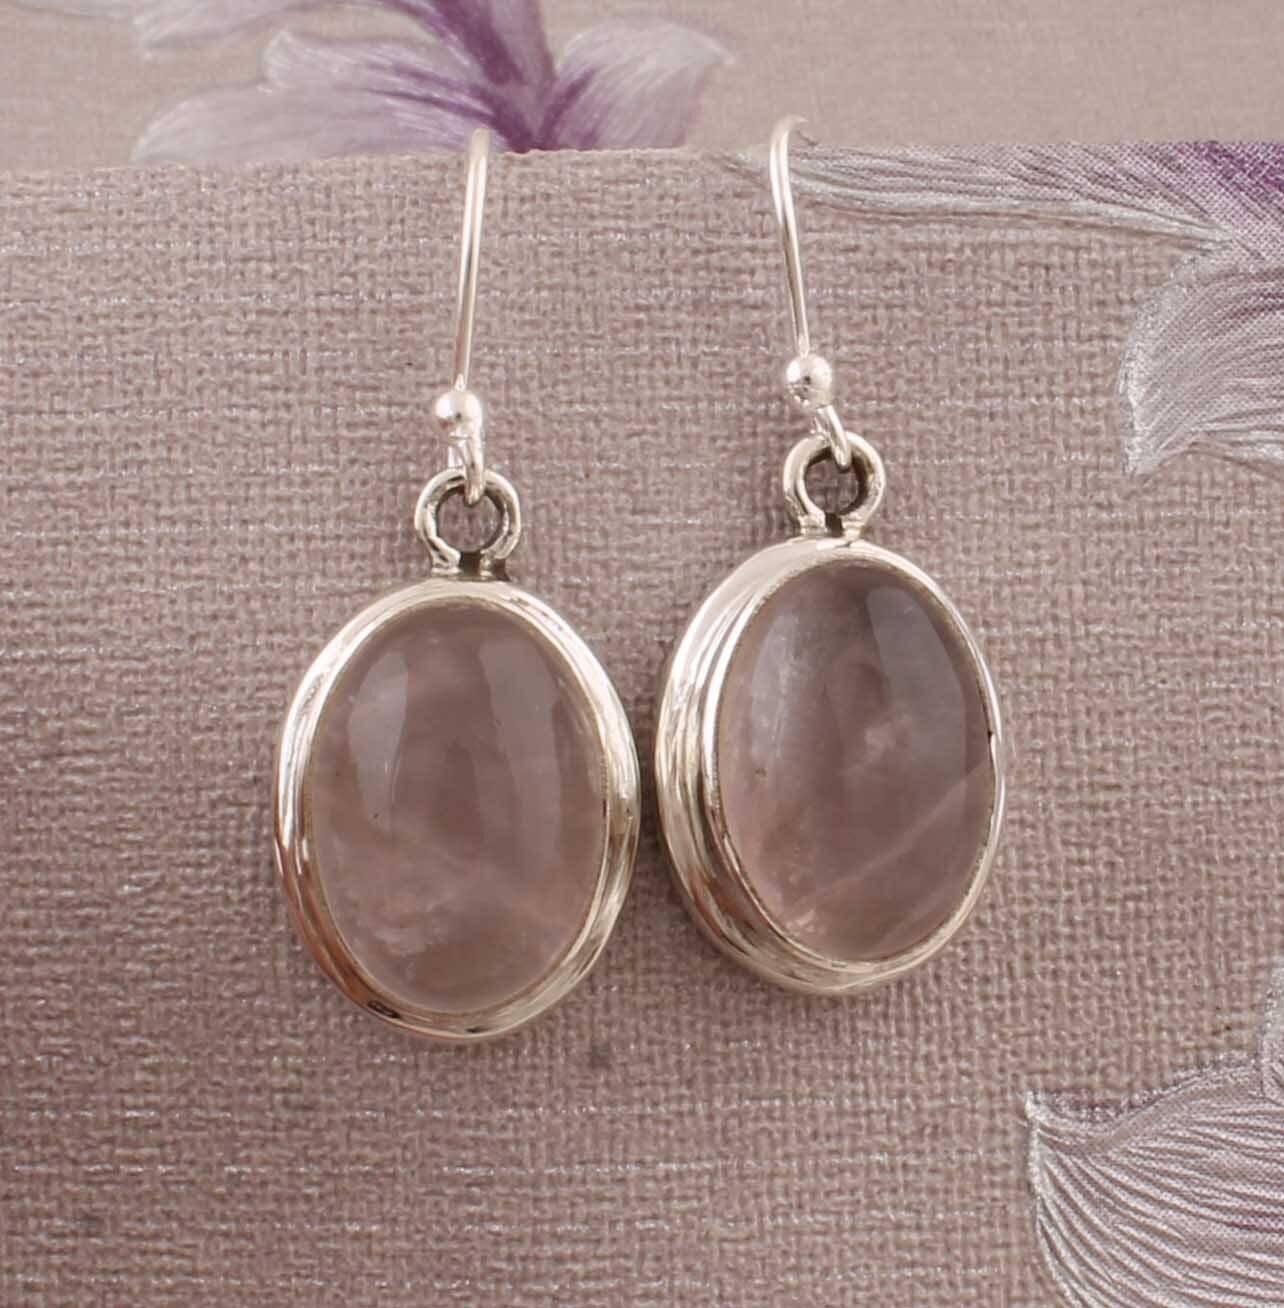 Natural Rose Quartz Top Quality Gemstone Earring 925-Sterling Silver Earring,Antique Silver Earring,Wedding Beautiful Earring Gift For Her